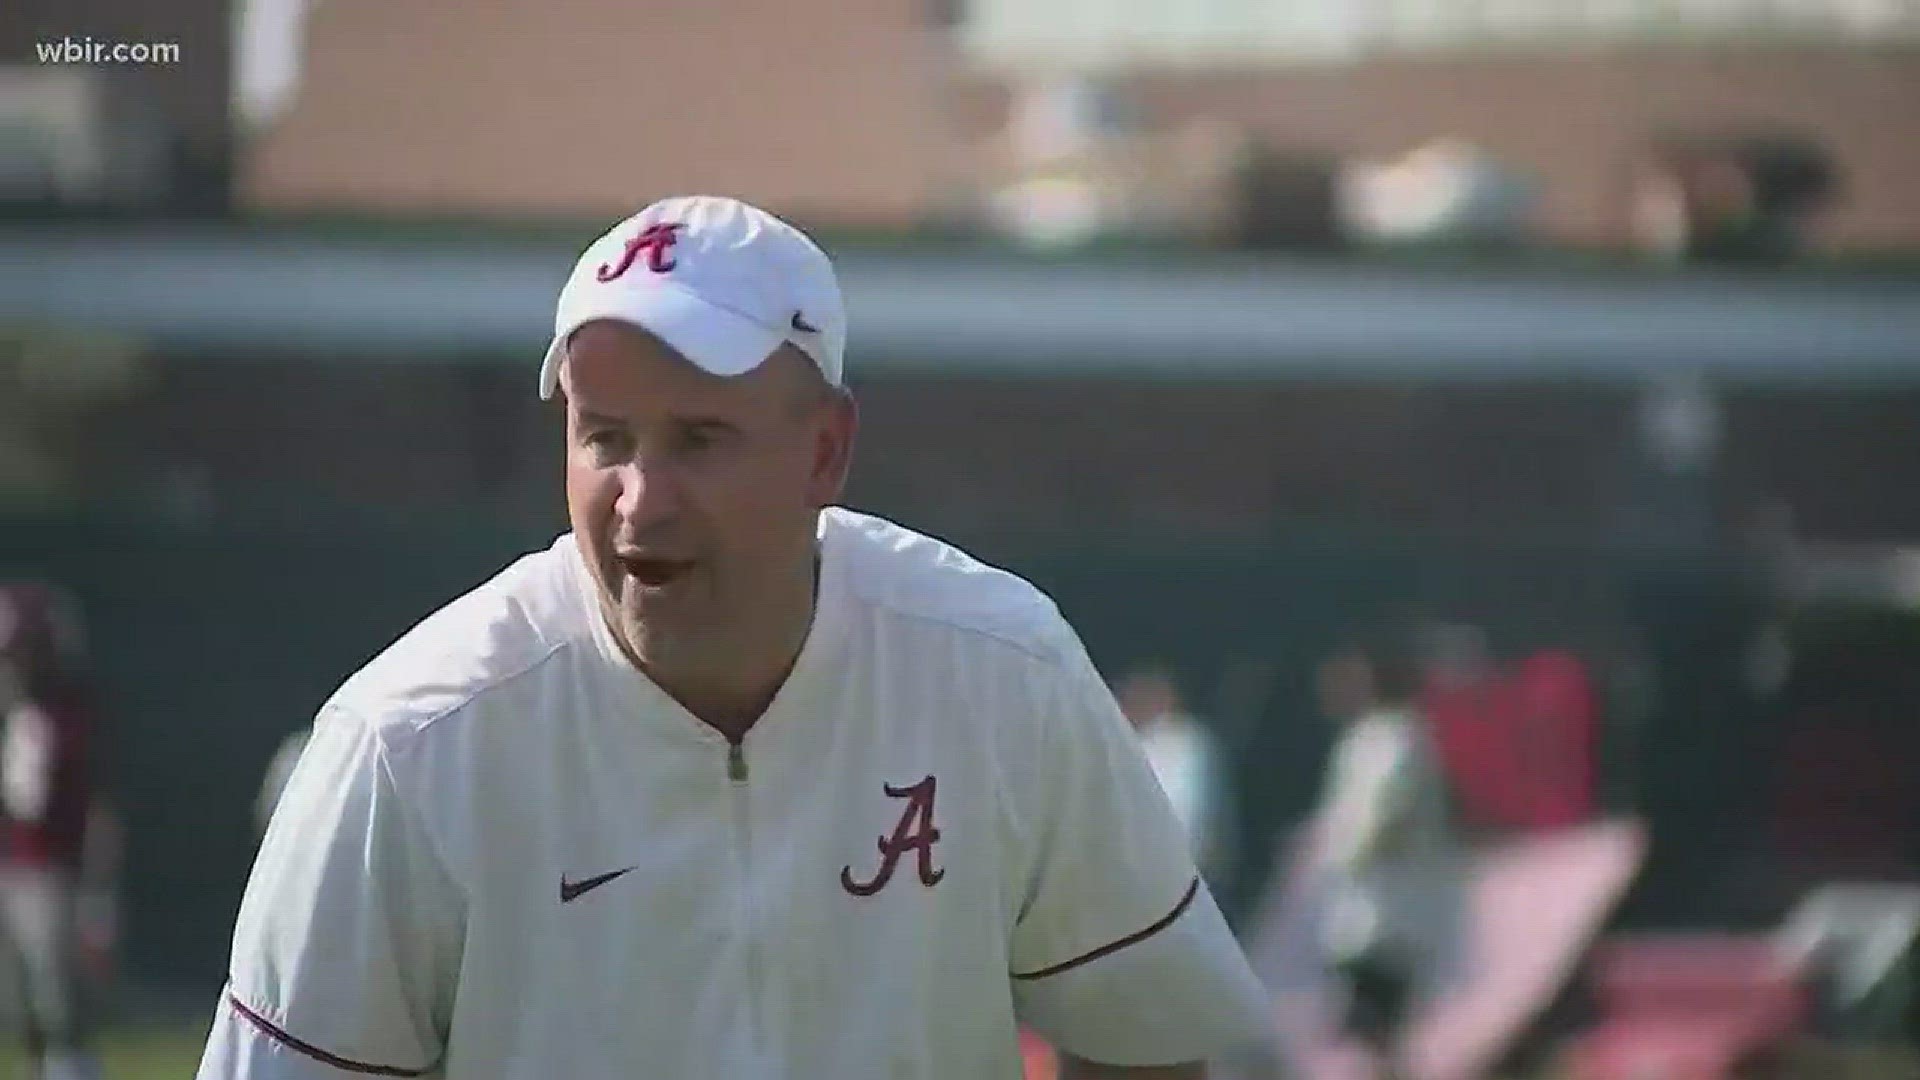 4 pm coverage of Tennessee's new coach, Jeremy Pruitt, defensive coordinator at Alabama.